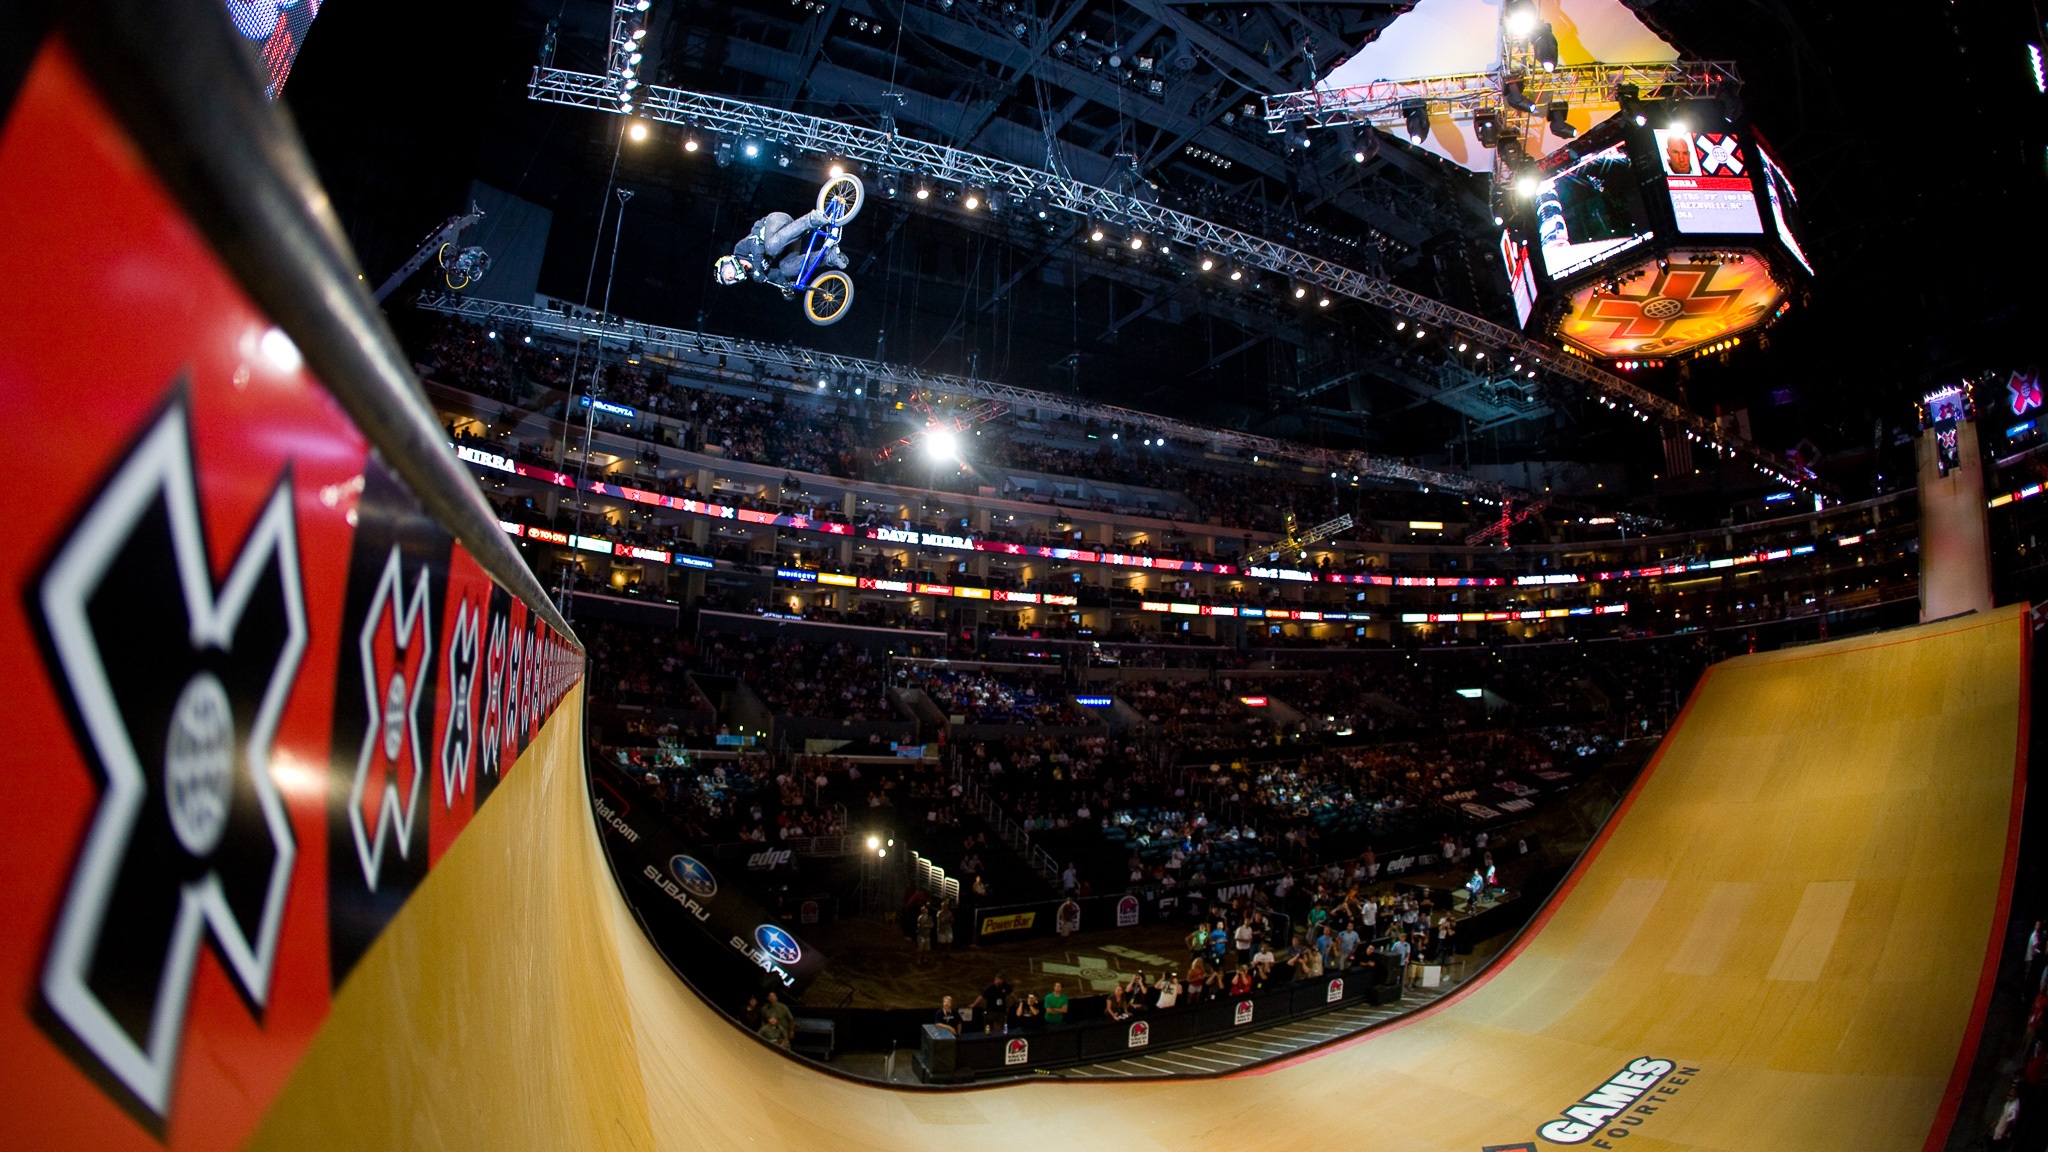 X Games and action sports videos, photos, athletes, events